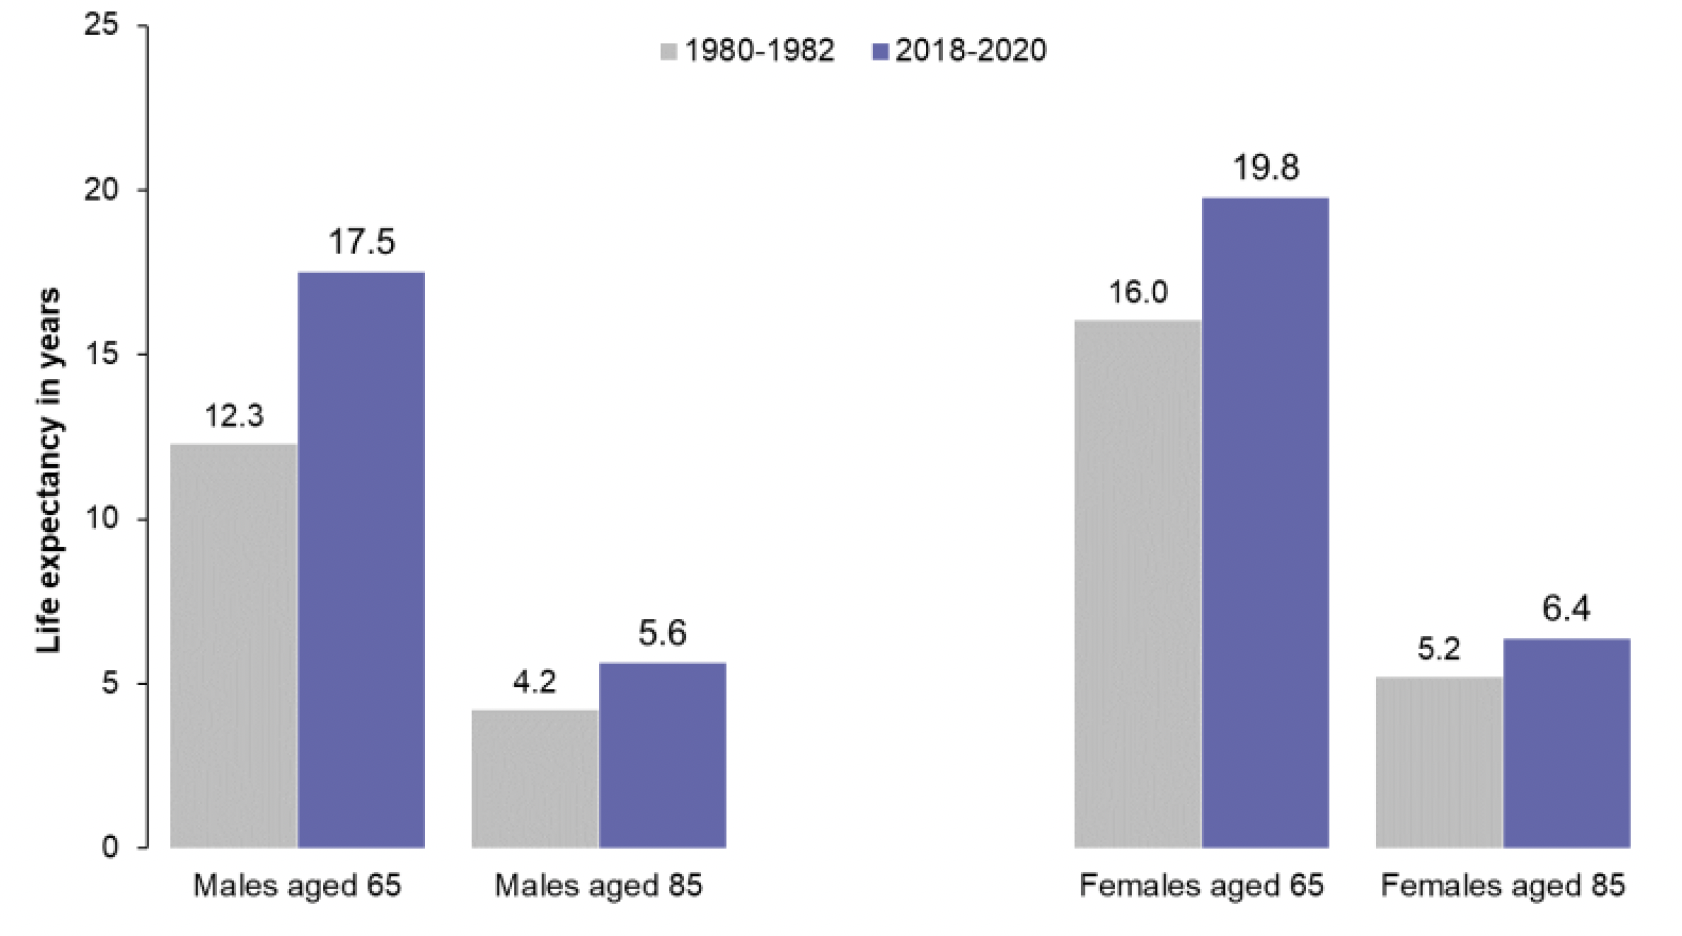 Bar chart showing that between 1980-1982 and 2018-20:
• Life expectancy for males aged 65 has increased by 5.2 years. 
• Life expectancy for females aged 65 has increased by 3.7 years.
• Life expectancy for males aged 85 has increased by 1.4 years. 
• Life expectancy for females aged 85 has increased by 1.2 years. 